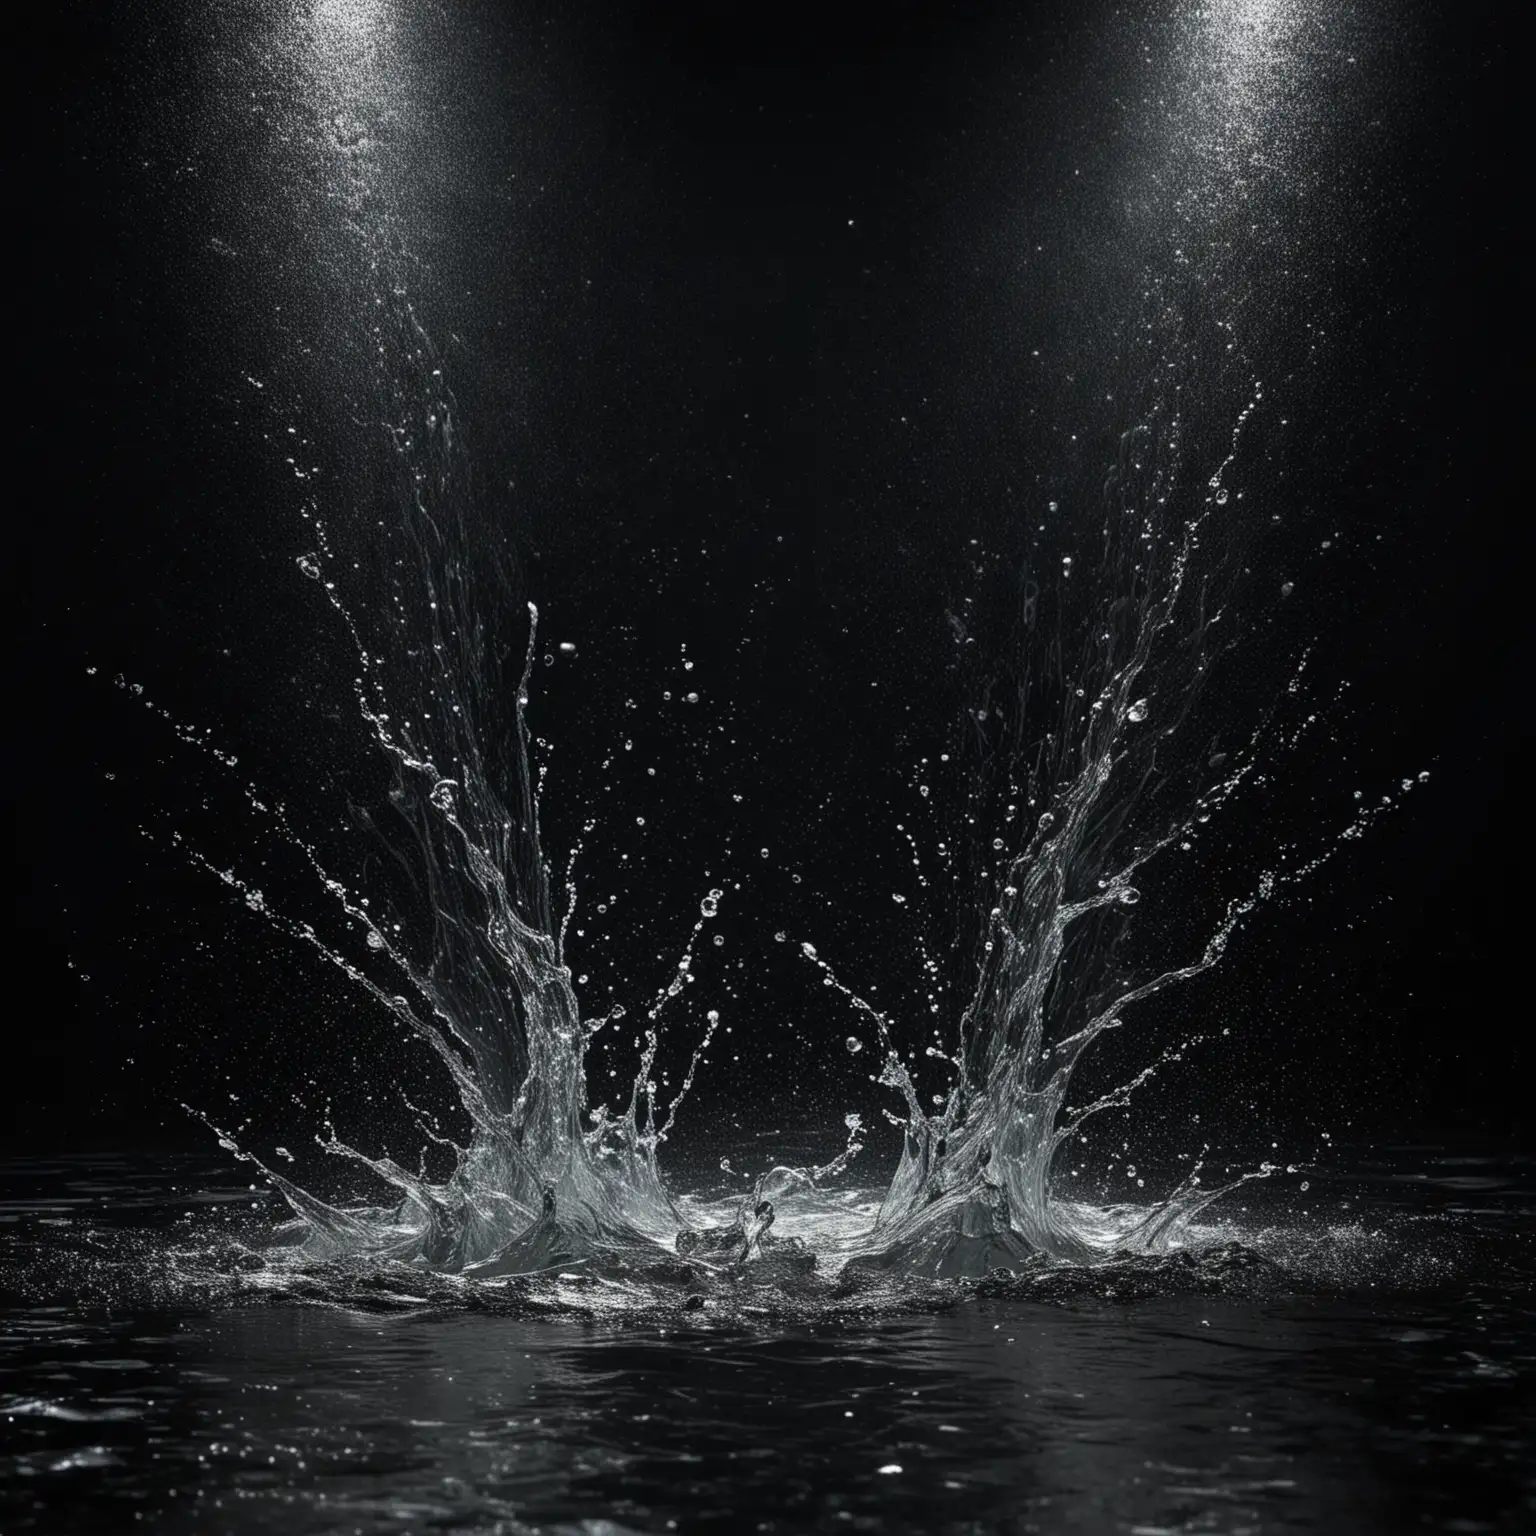 Ethereal-Water-Splashes-and-Glimmers-in-Dark-Background